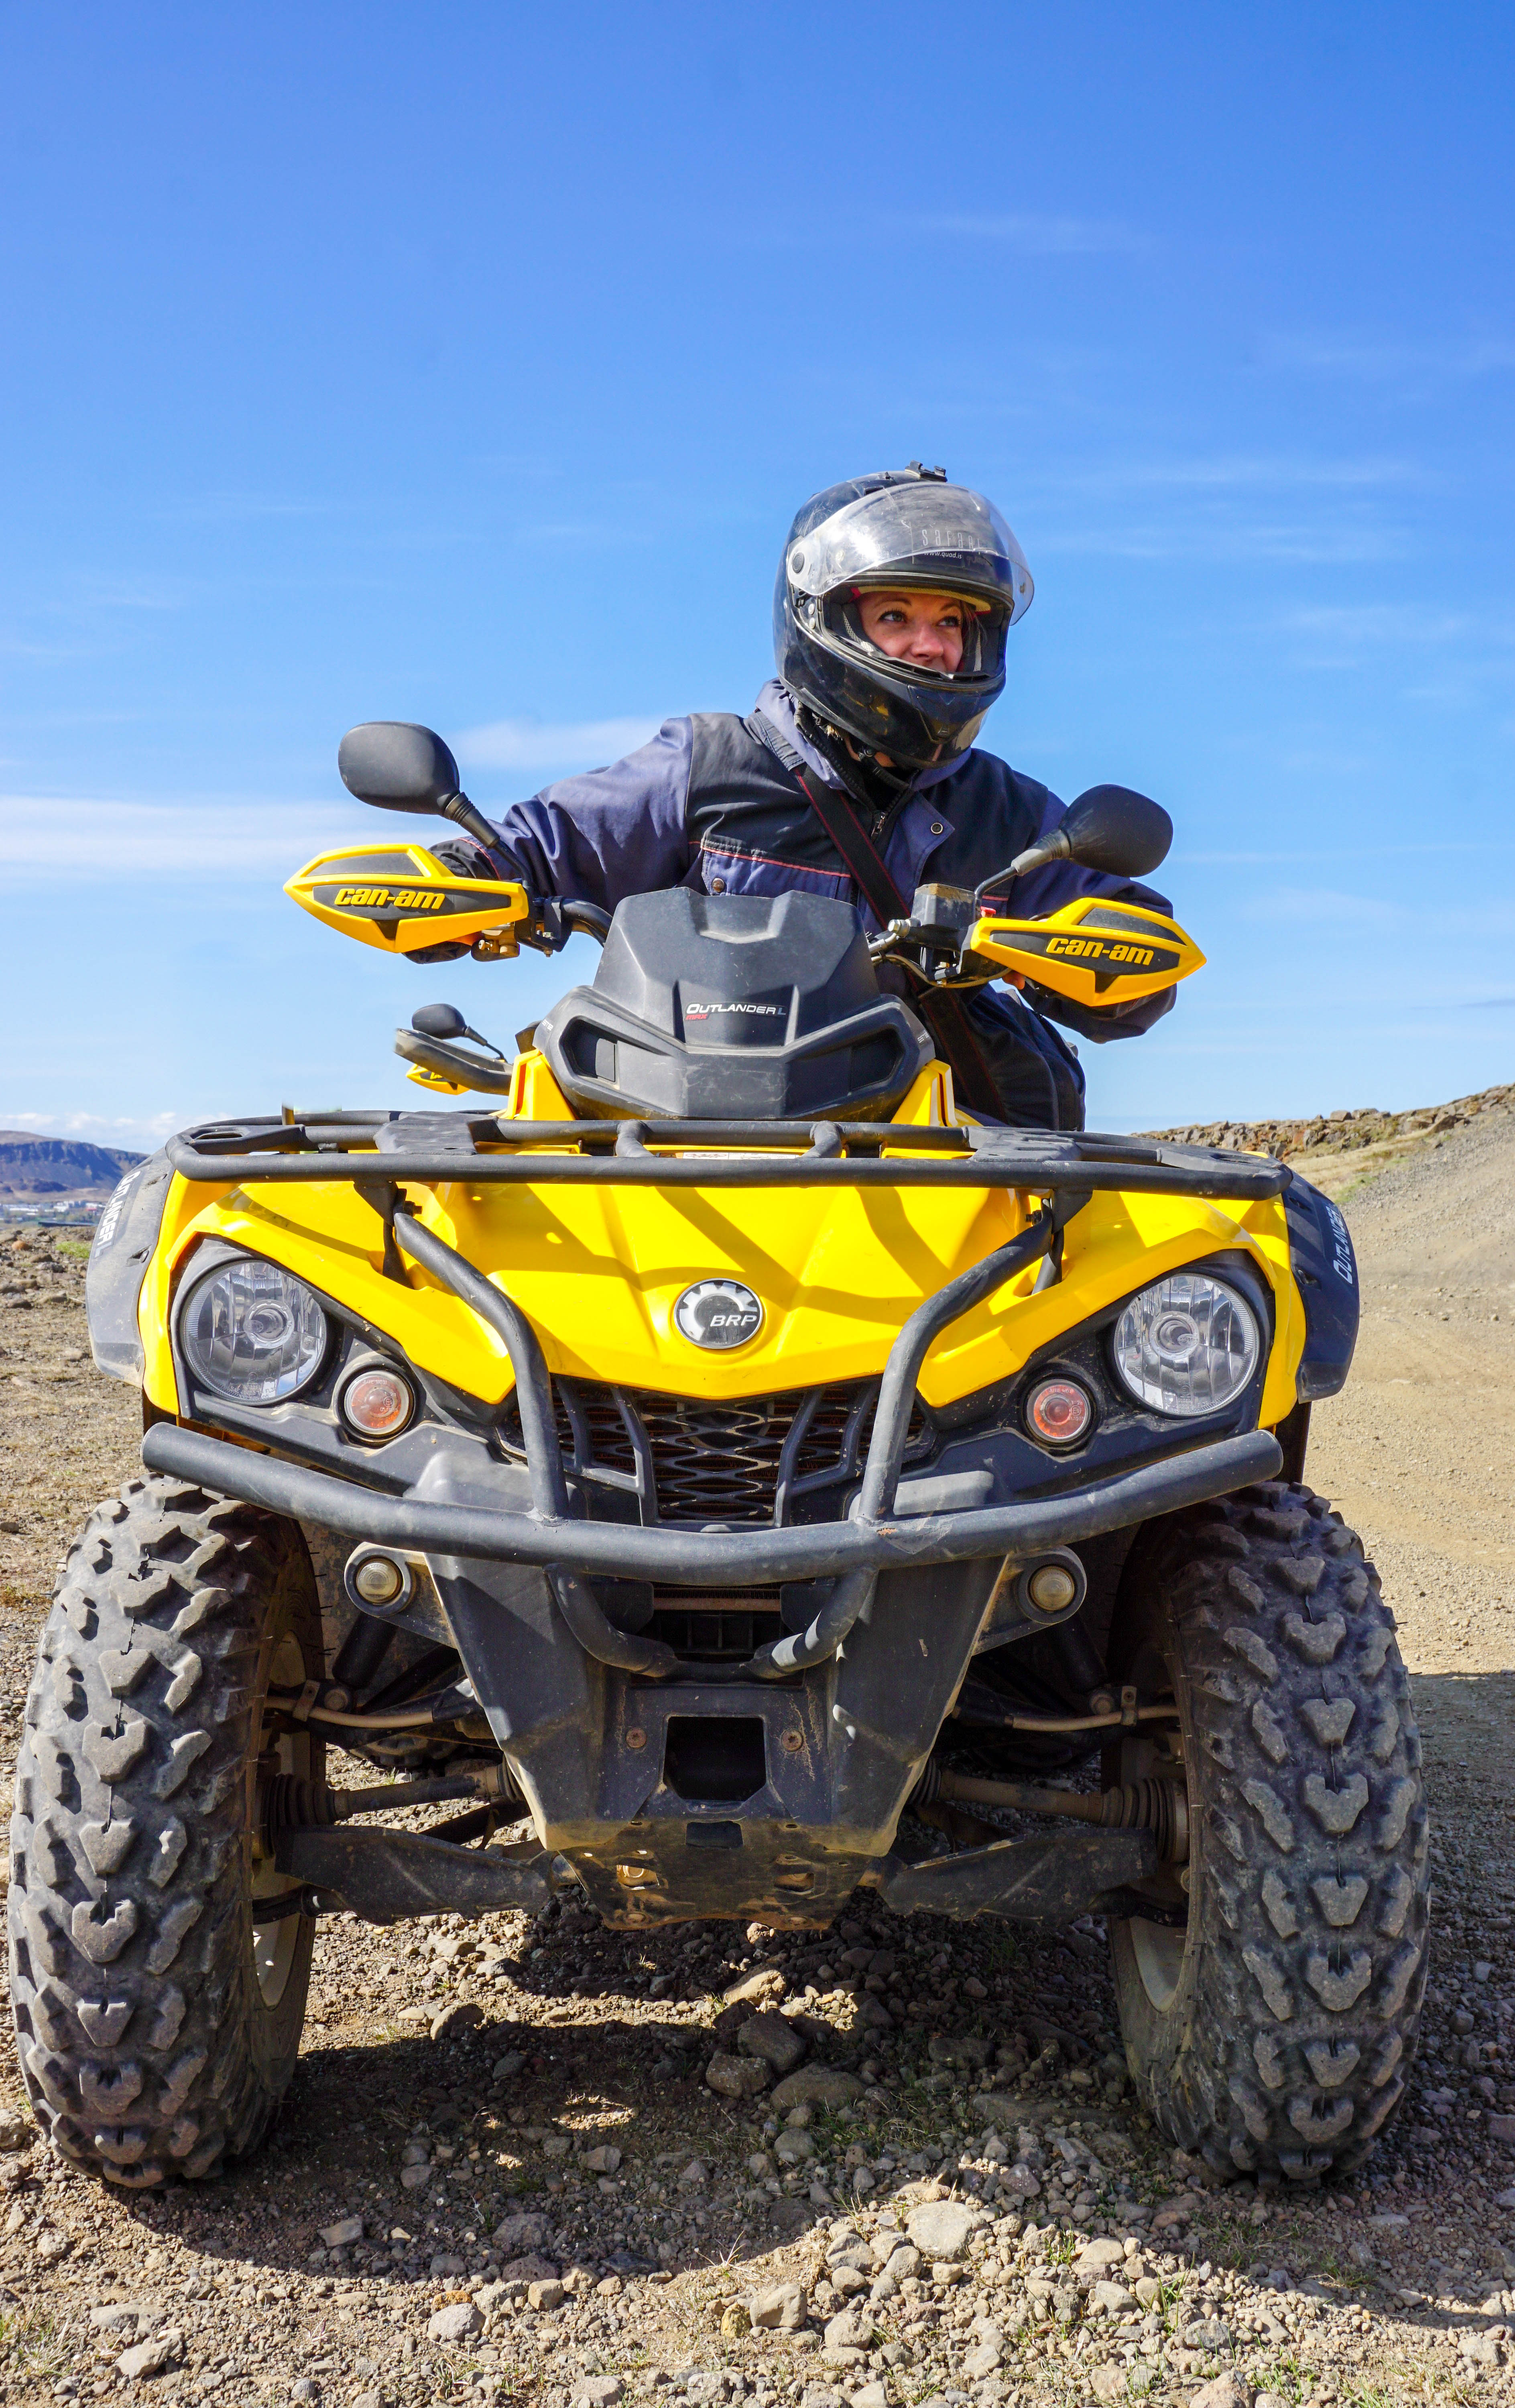 Looking for some off-road adventure in Iceland? There's no better way to get into nature and explore the wild Icelandic wilderness than with an ATV tour with Safari Quads! | Life With a View